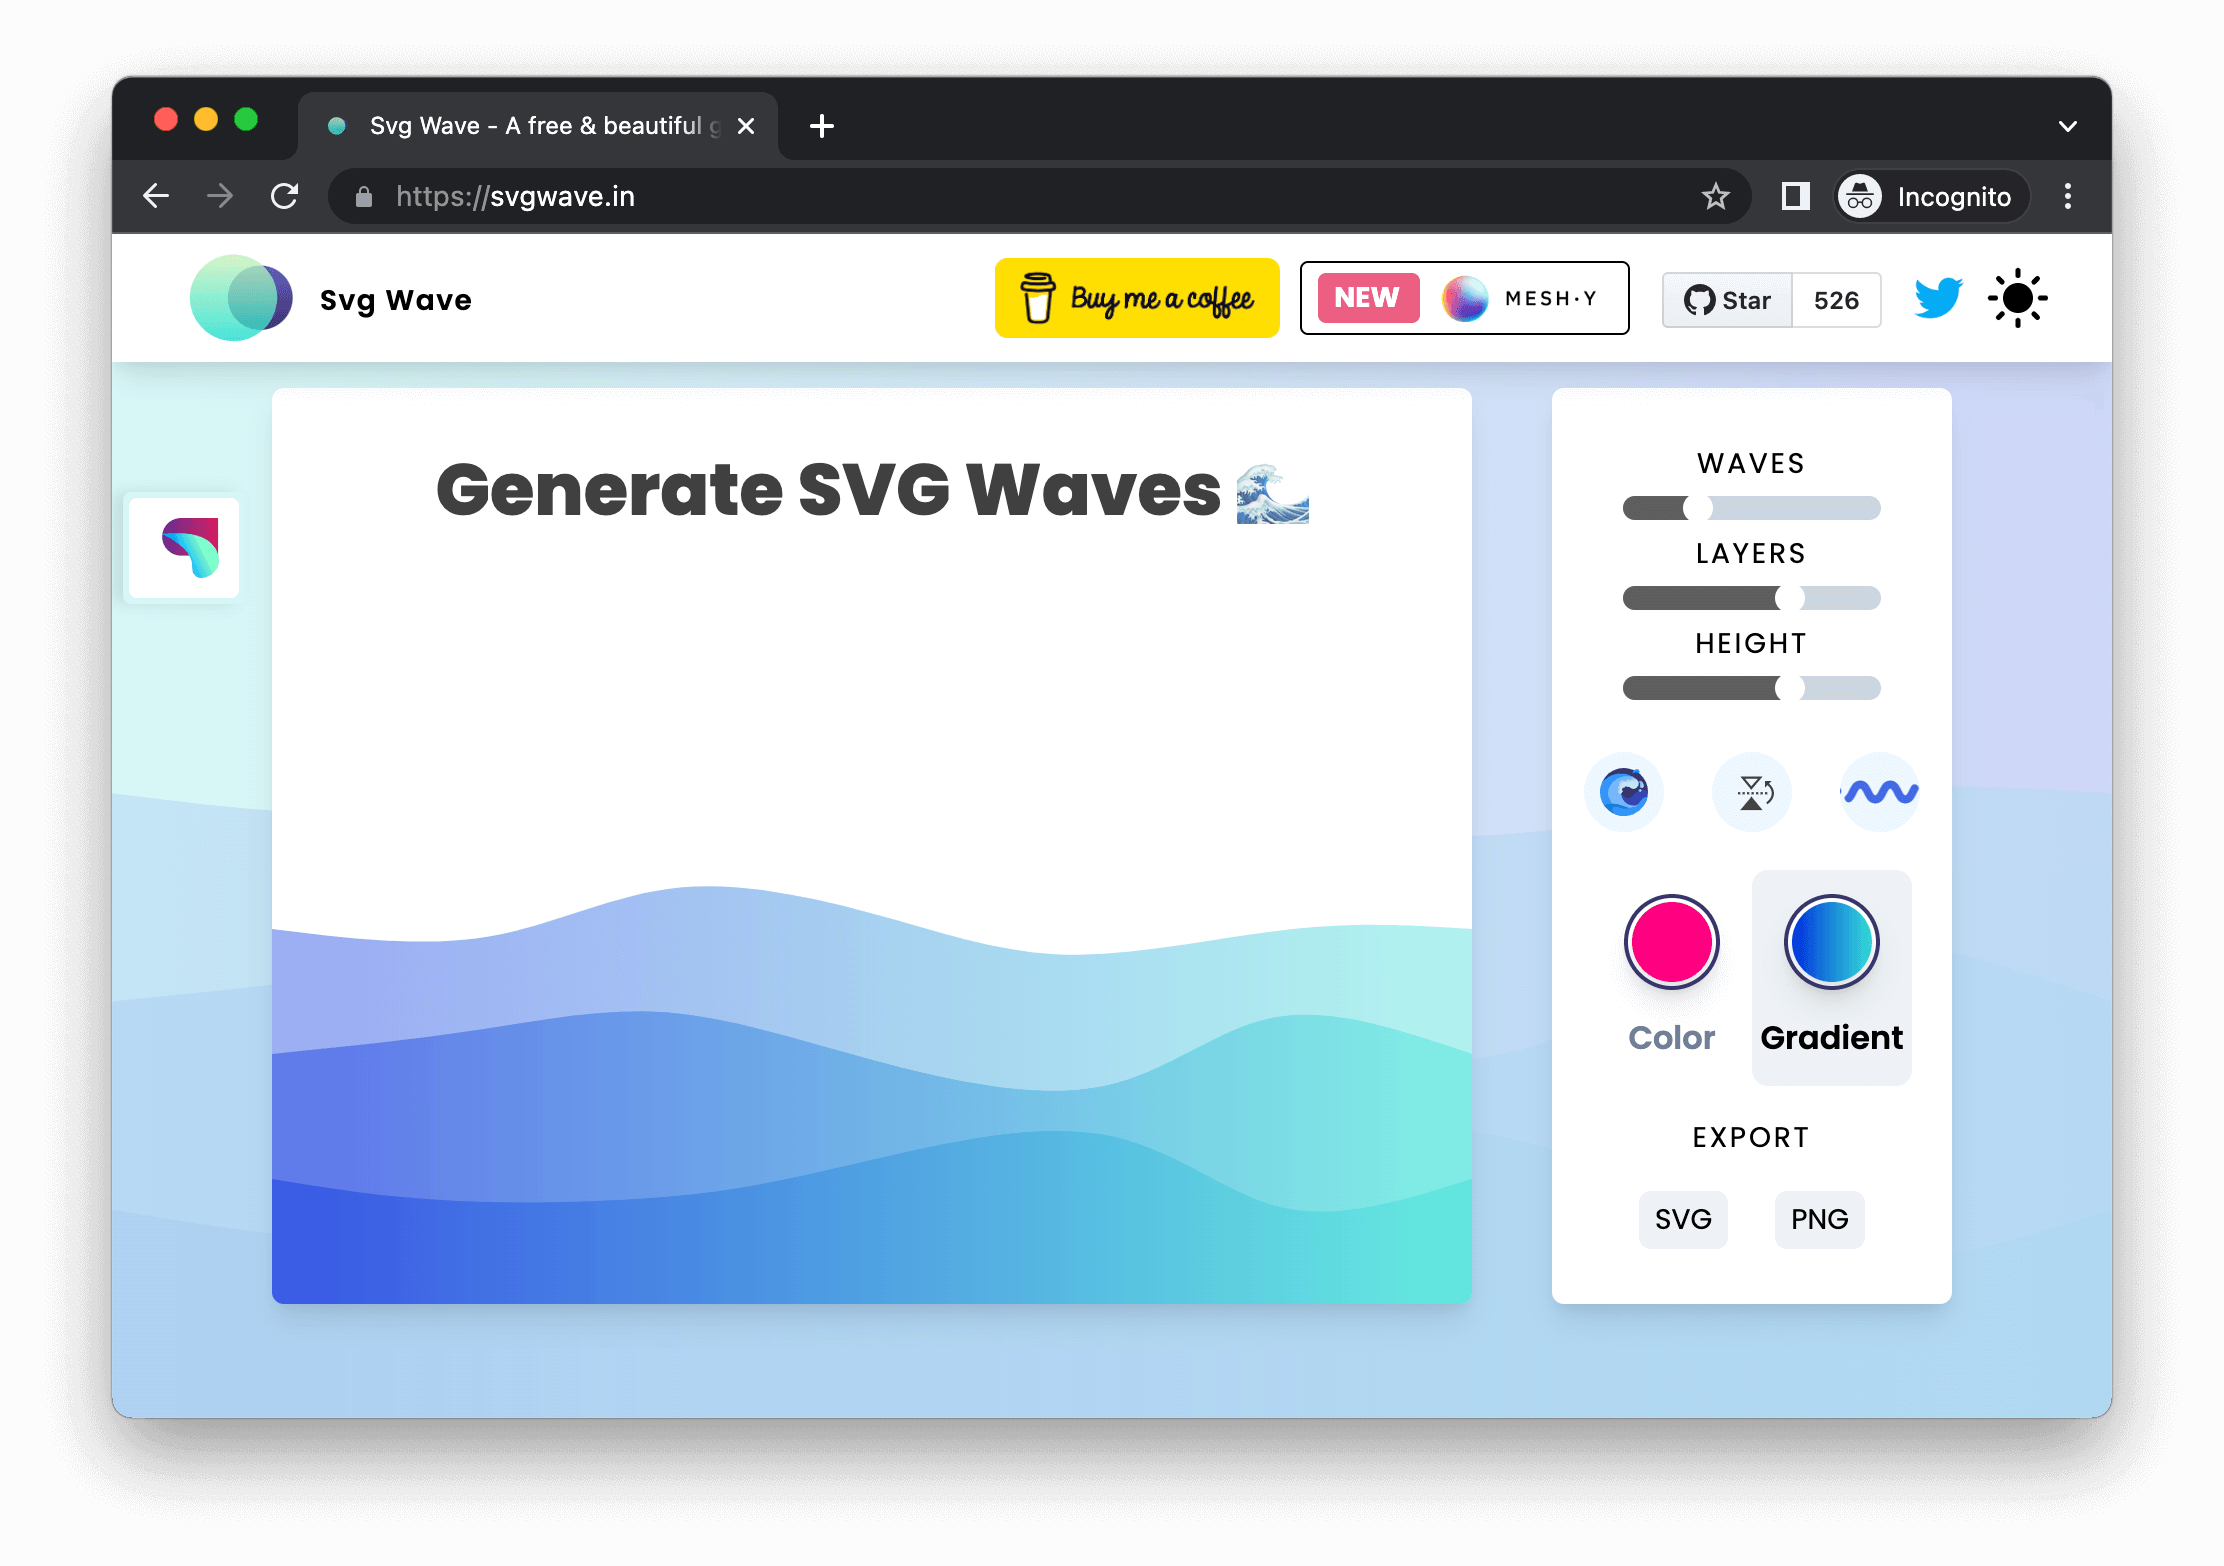 Svg Wave - A free & beautiful gradient SVG wave Generator